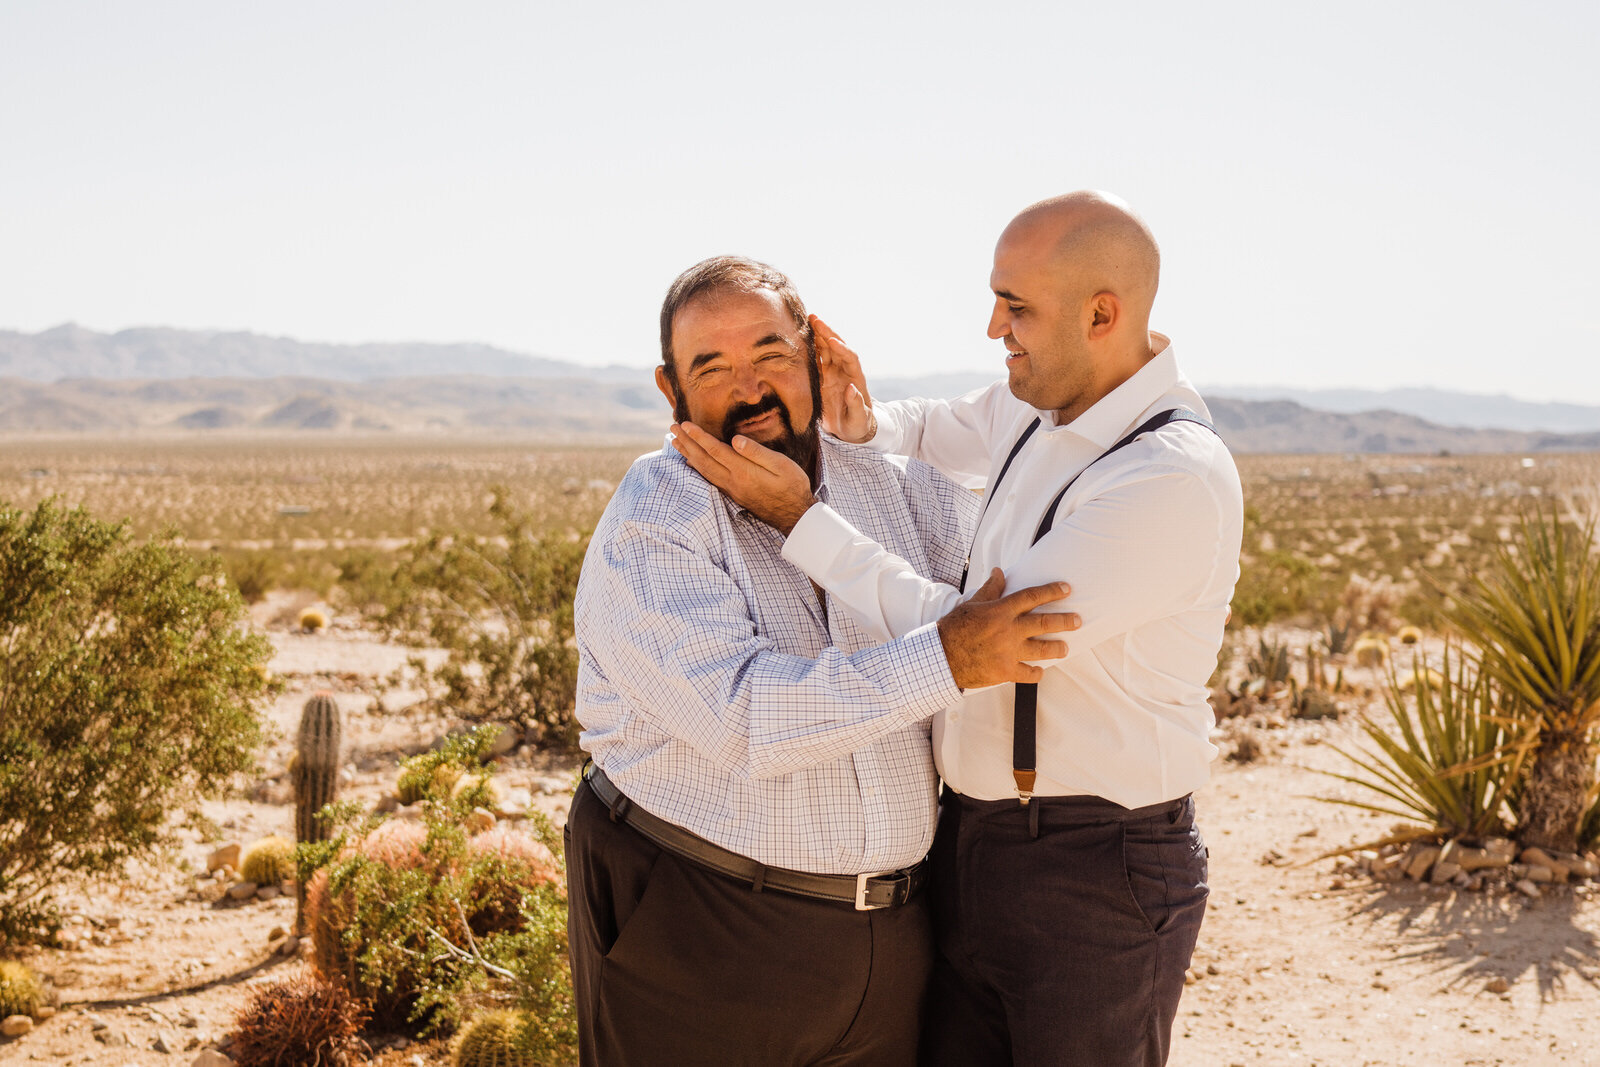 Groom and father of the groom laughing at Cactus Mountain Retreat before elopement in Joshua Tree | adventurous, fun, warm wedding photos by Kept Record | www.keptrecord.com